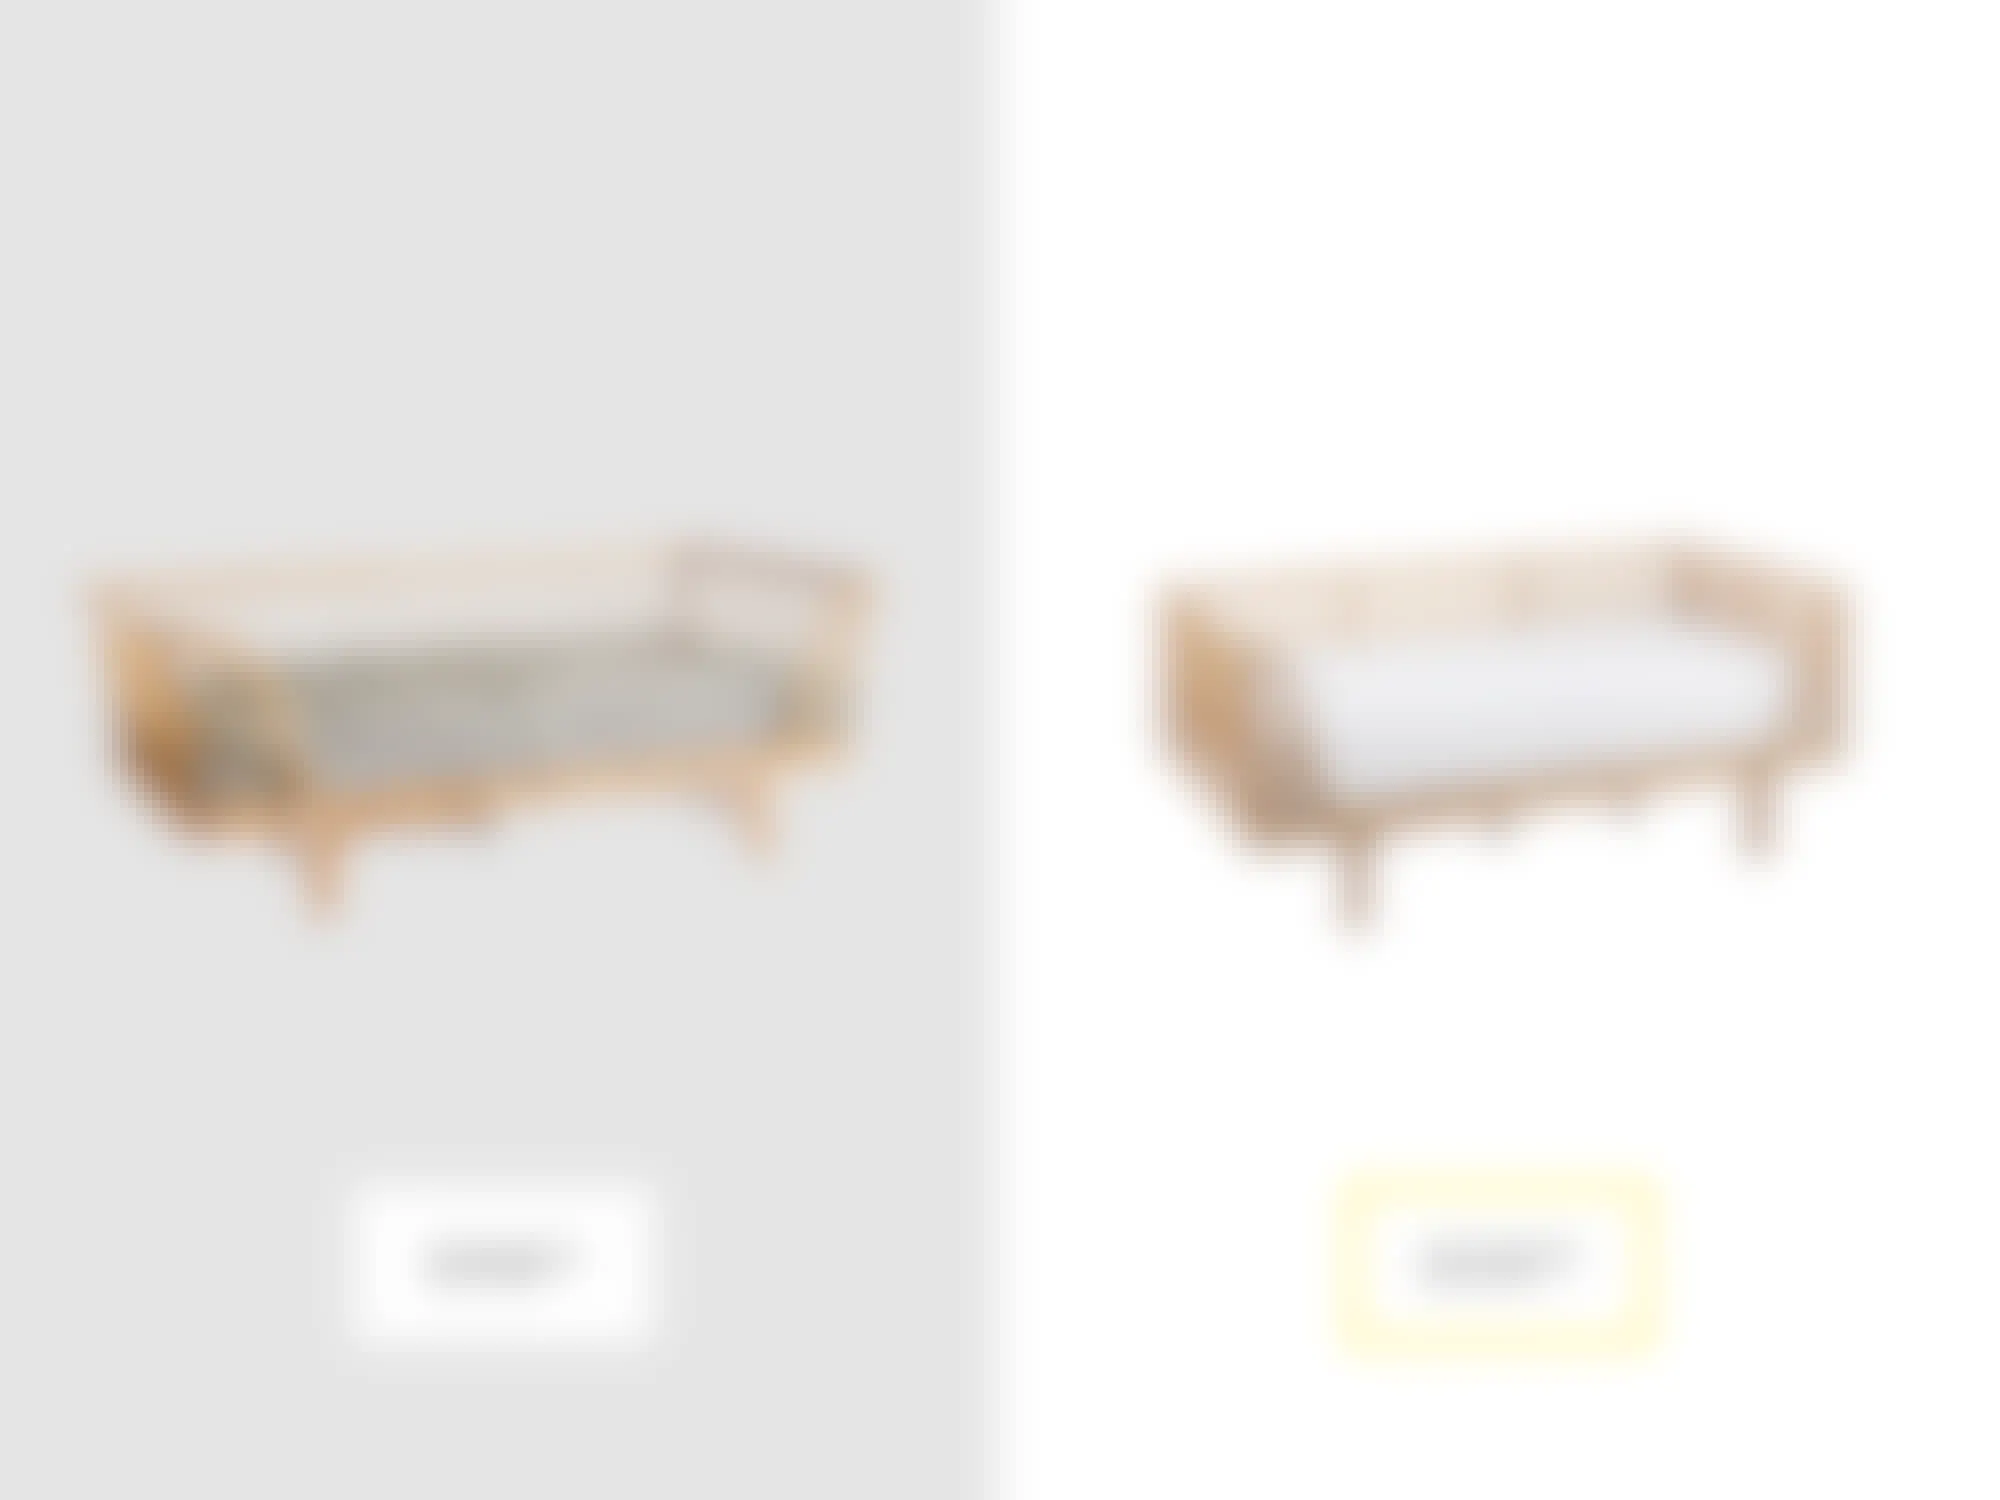 price comparison graphic with anthropologie venus rattan daybed and world market honey rattan daybed